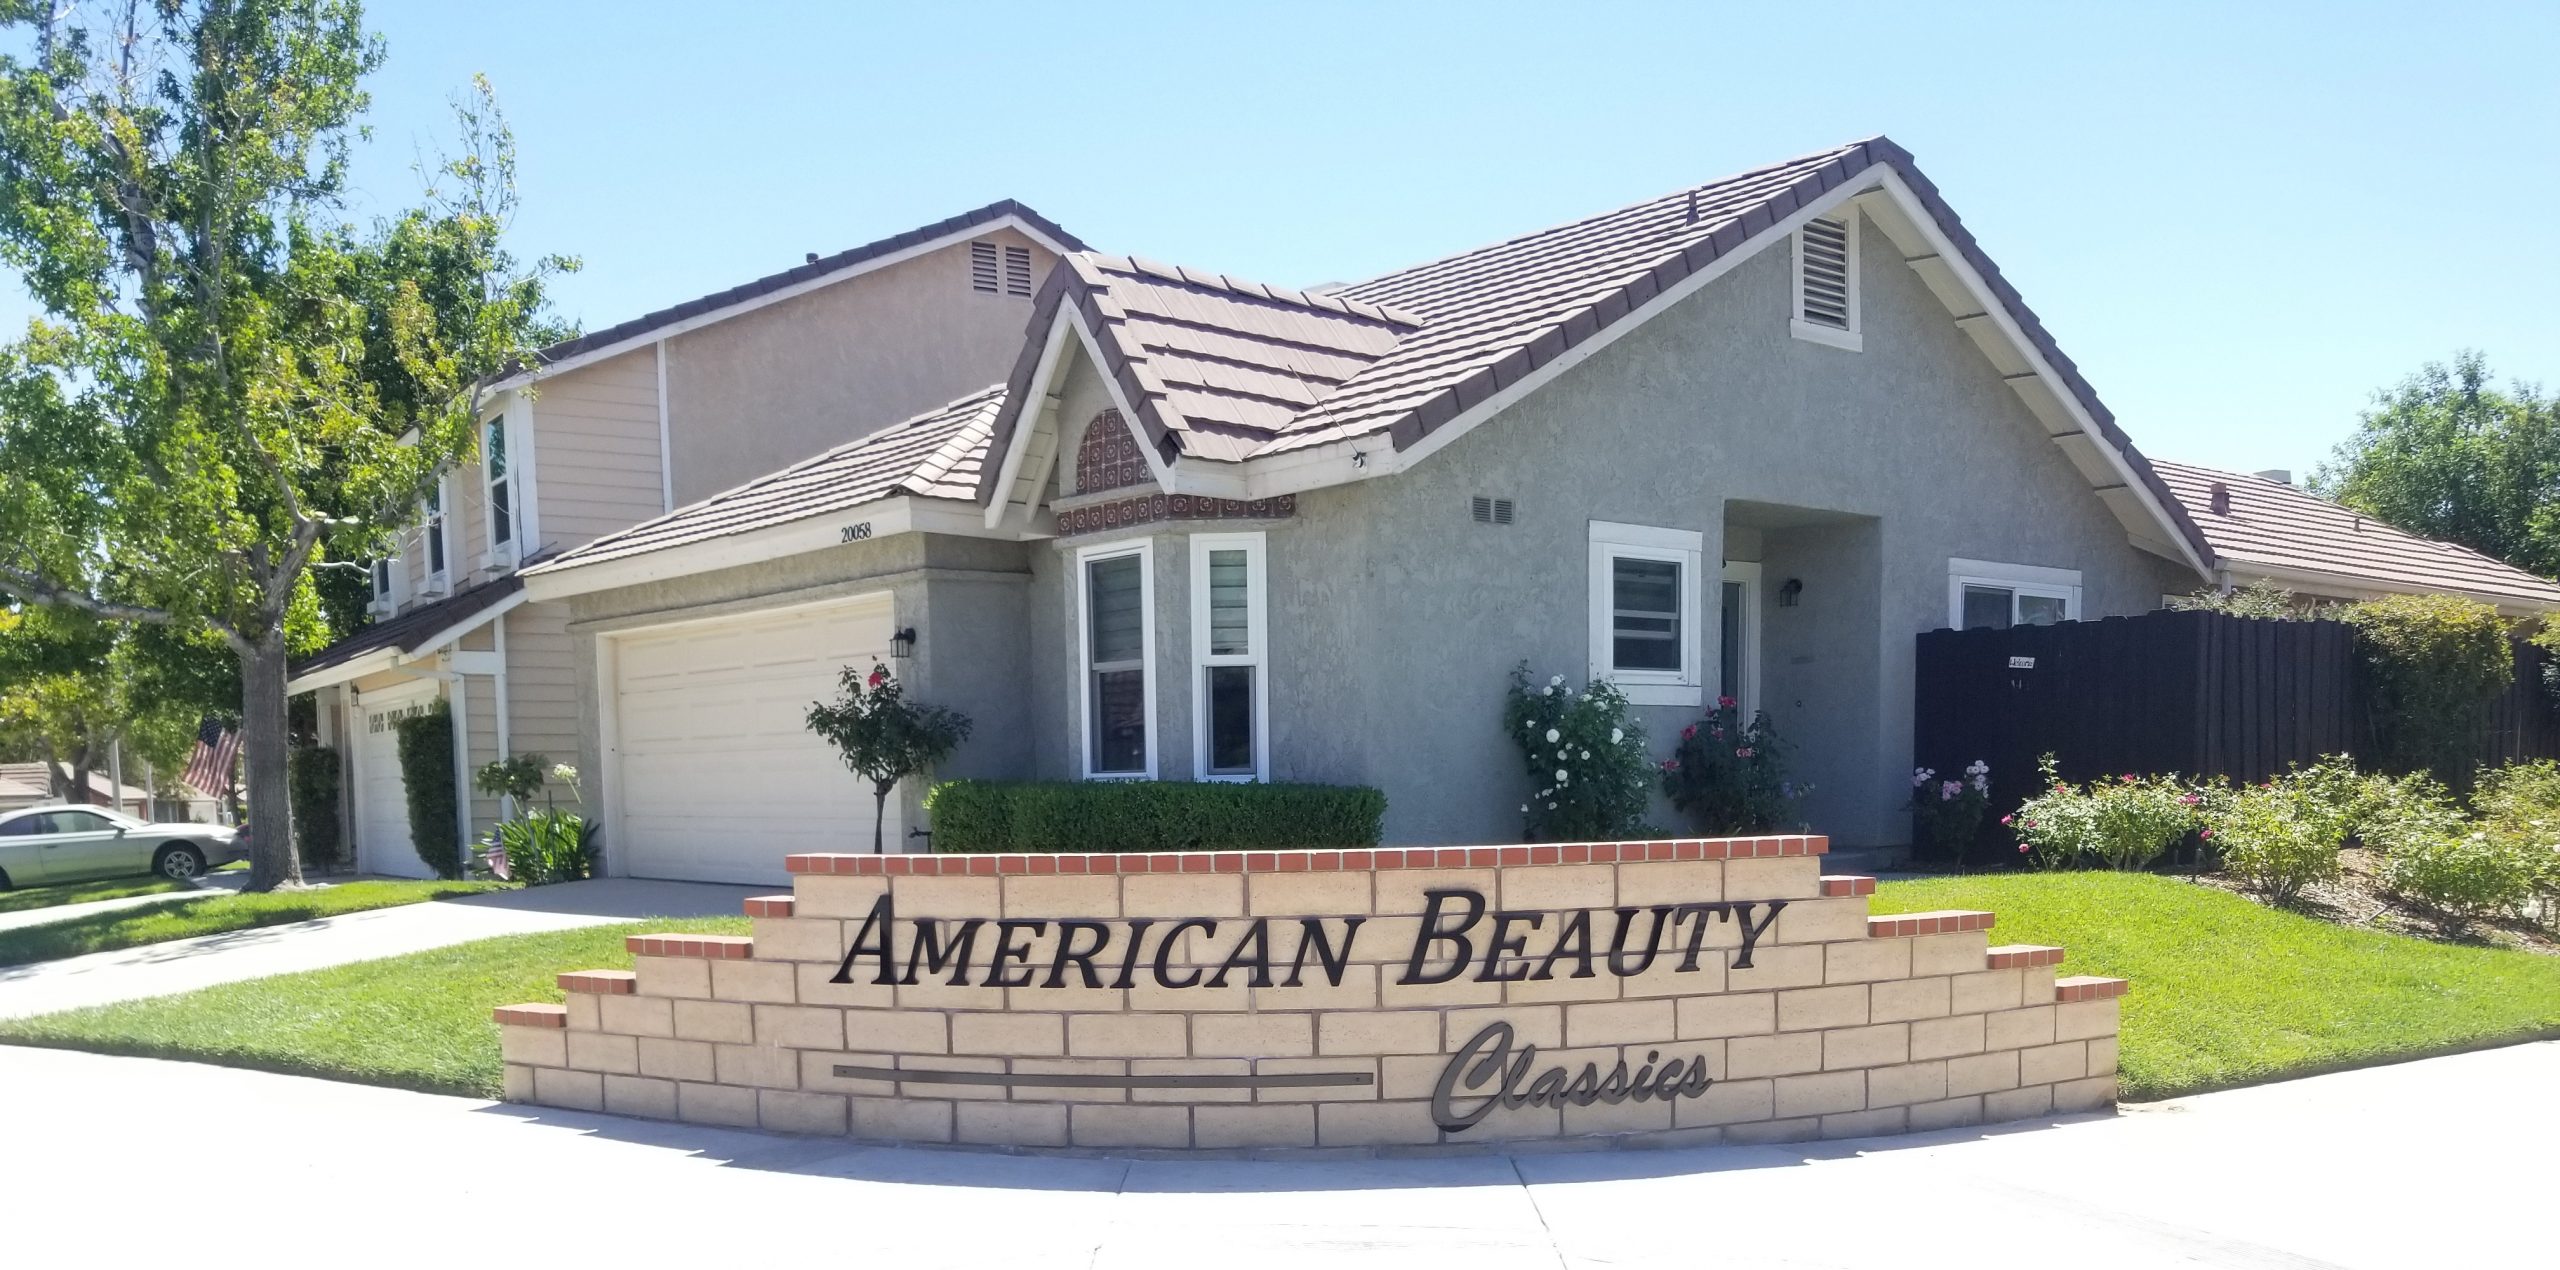 These are the extra streetside dimensional letters we made for American Beauty Classics in Canyon Country.